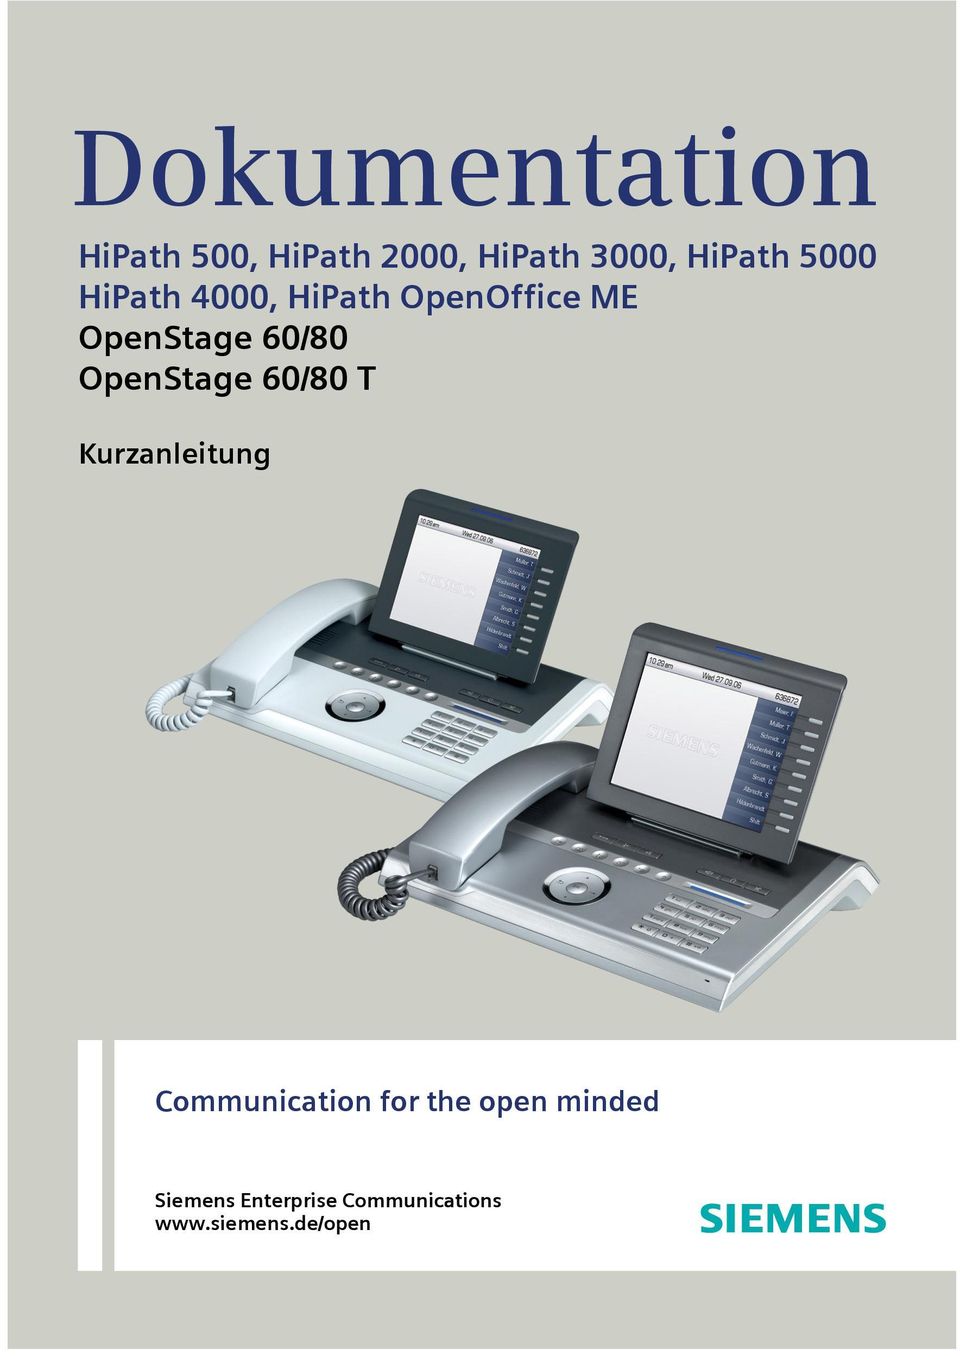 OpenStage 60/80 T Kurzanleitung Communication for the open